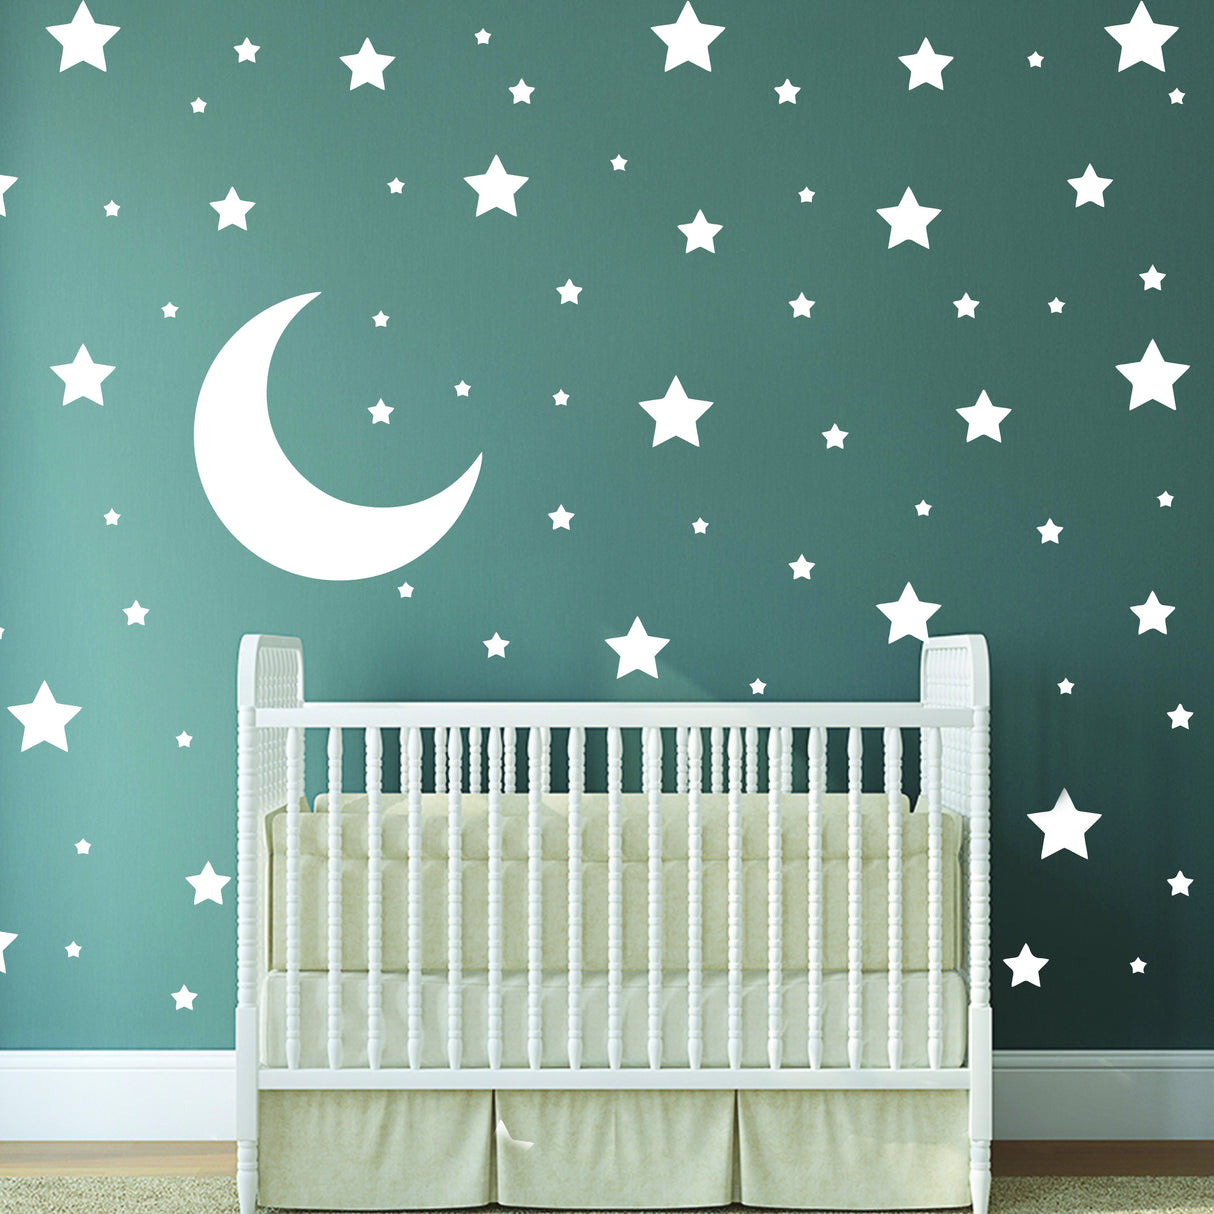 233x White Stars Wall Vinyl Stickers - Little Peel And Stick Art Map Die Cut Ceiling Decal